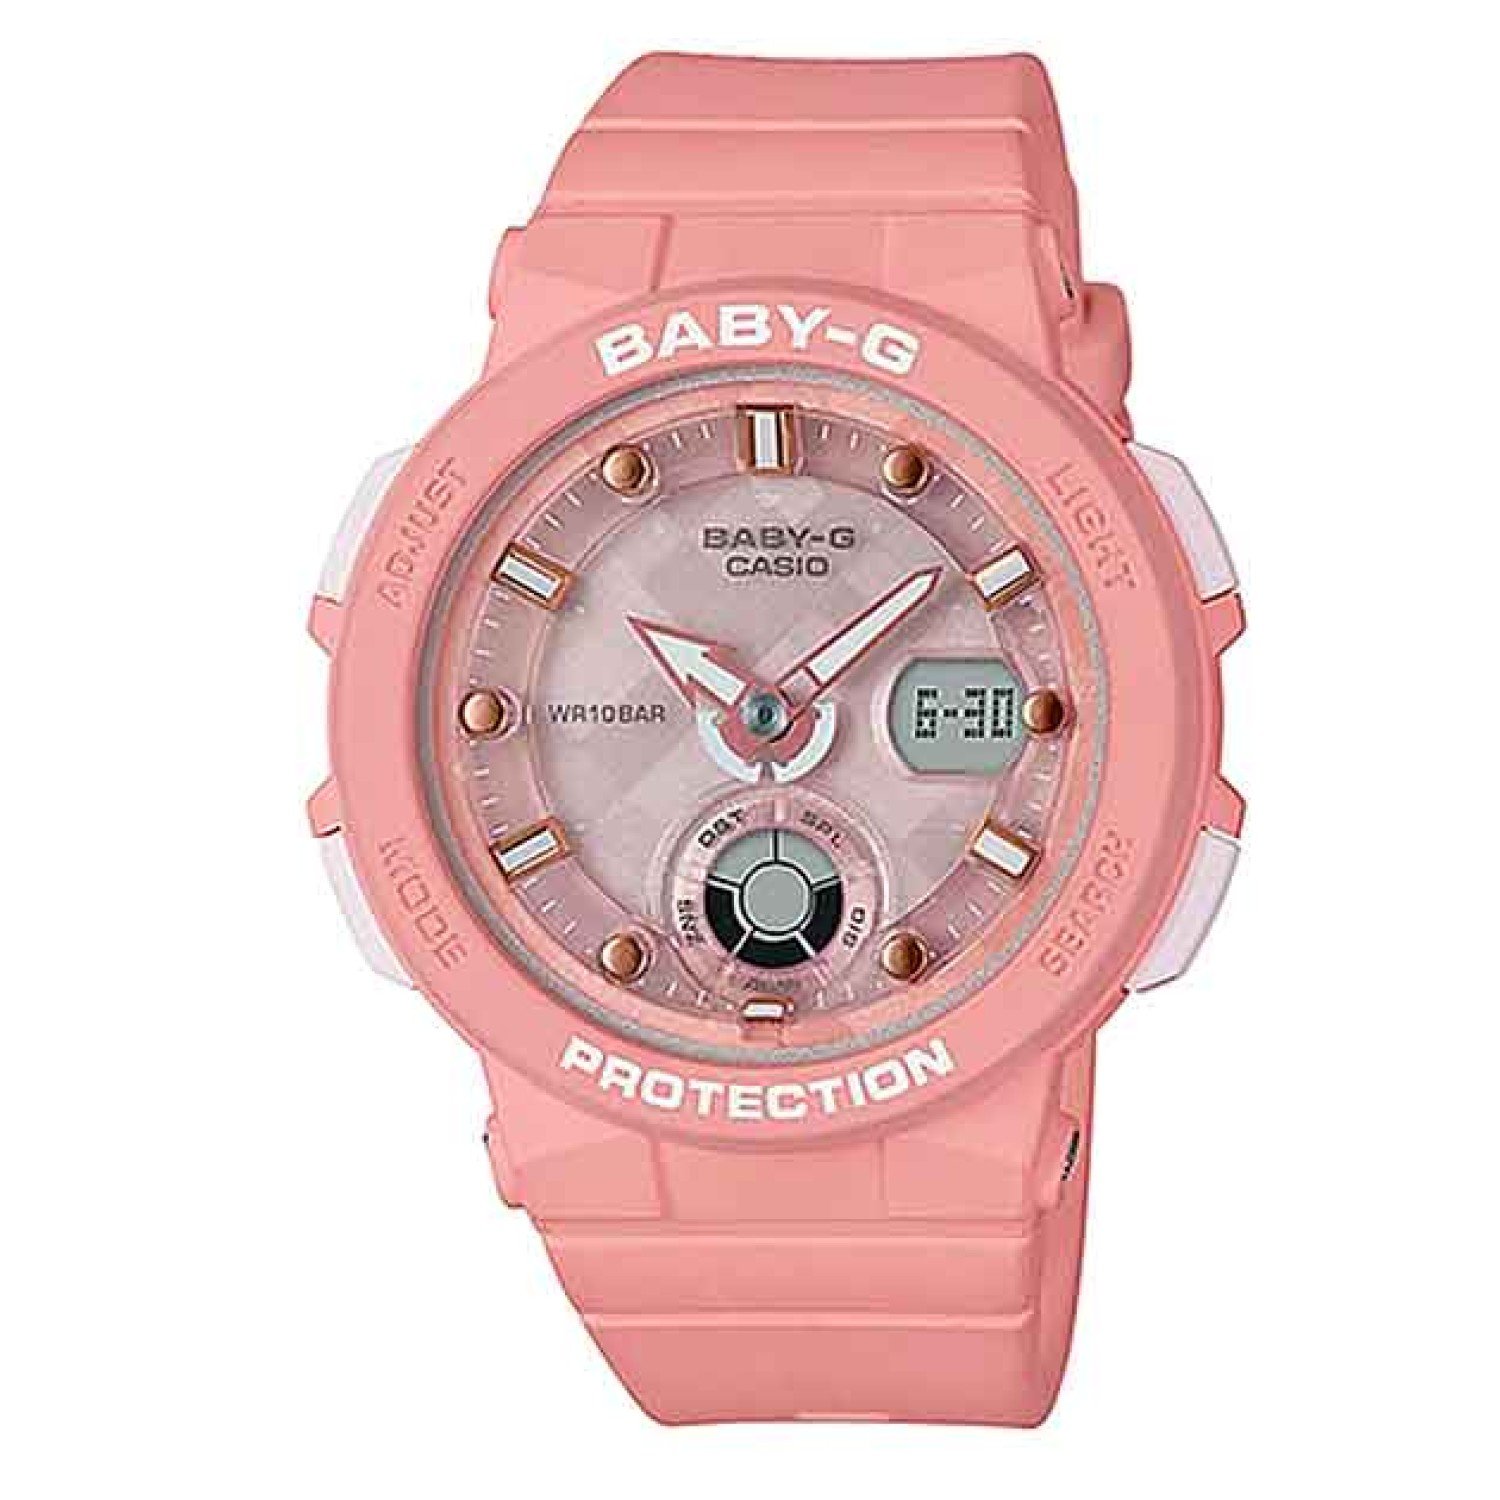 BGA250-4A Casio BabY-G  Beach Traveler Series. Introducing a new Beach Traveler Series of summer themed models from BABY-G, the casual watch for active women. Part of a series based on a theme that highlights the beauty of a summertime beach, these models